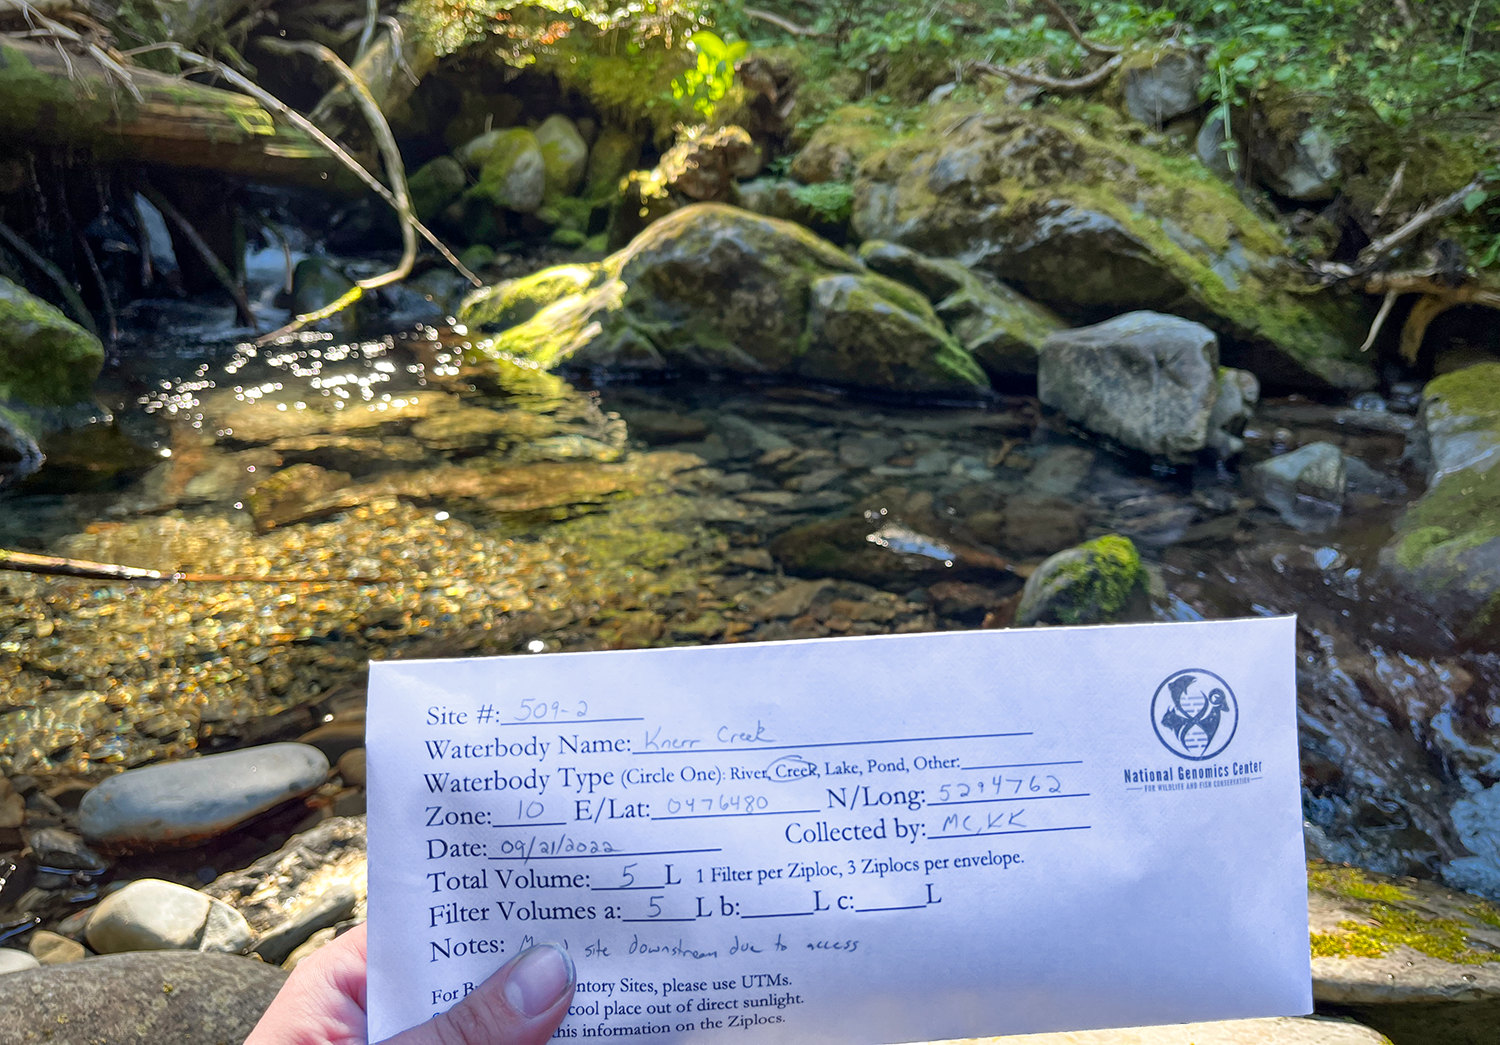 A hand holds a paper envelope with "National Genomics Center" markings in front of a forest stream listed as Knerr Creek.